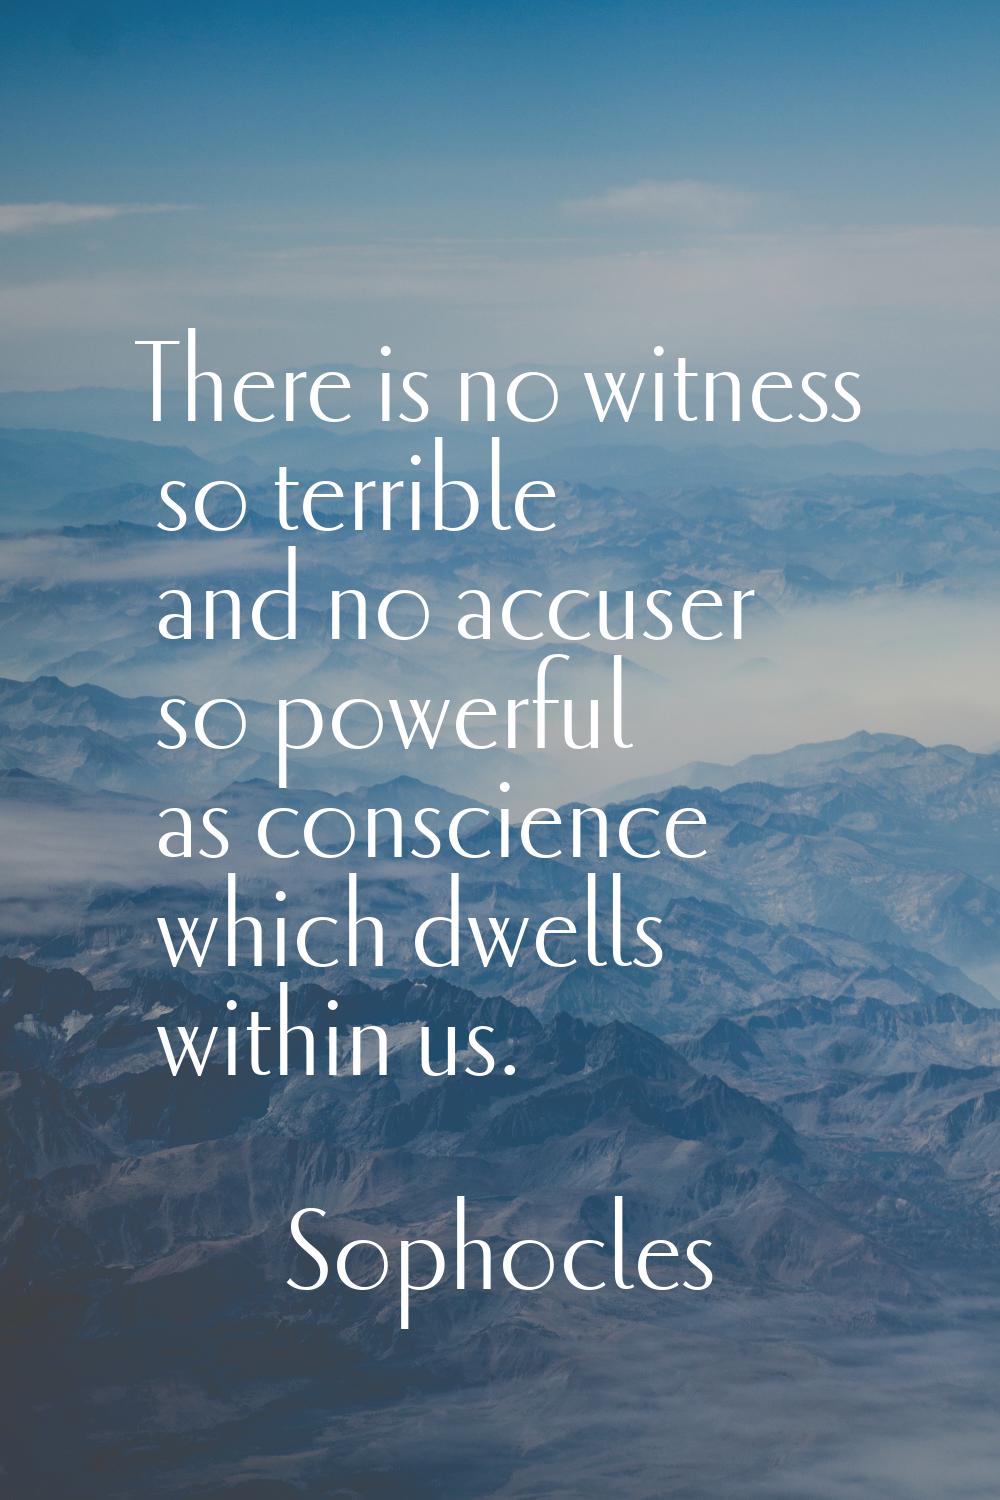 There is no witness so terrible and no accuser so powerful as conscience which dwells within us.